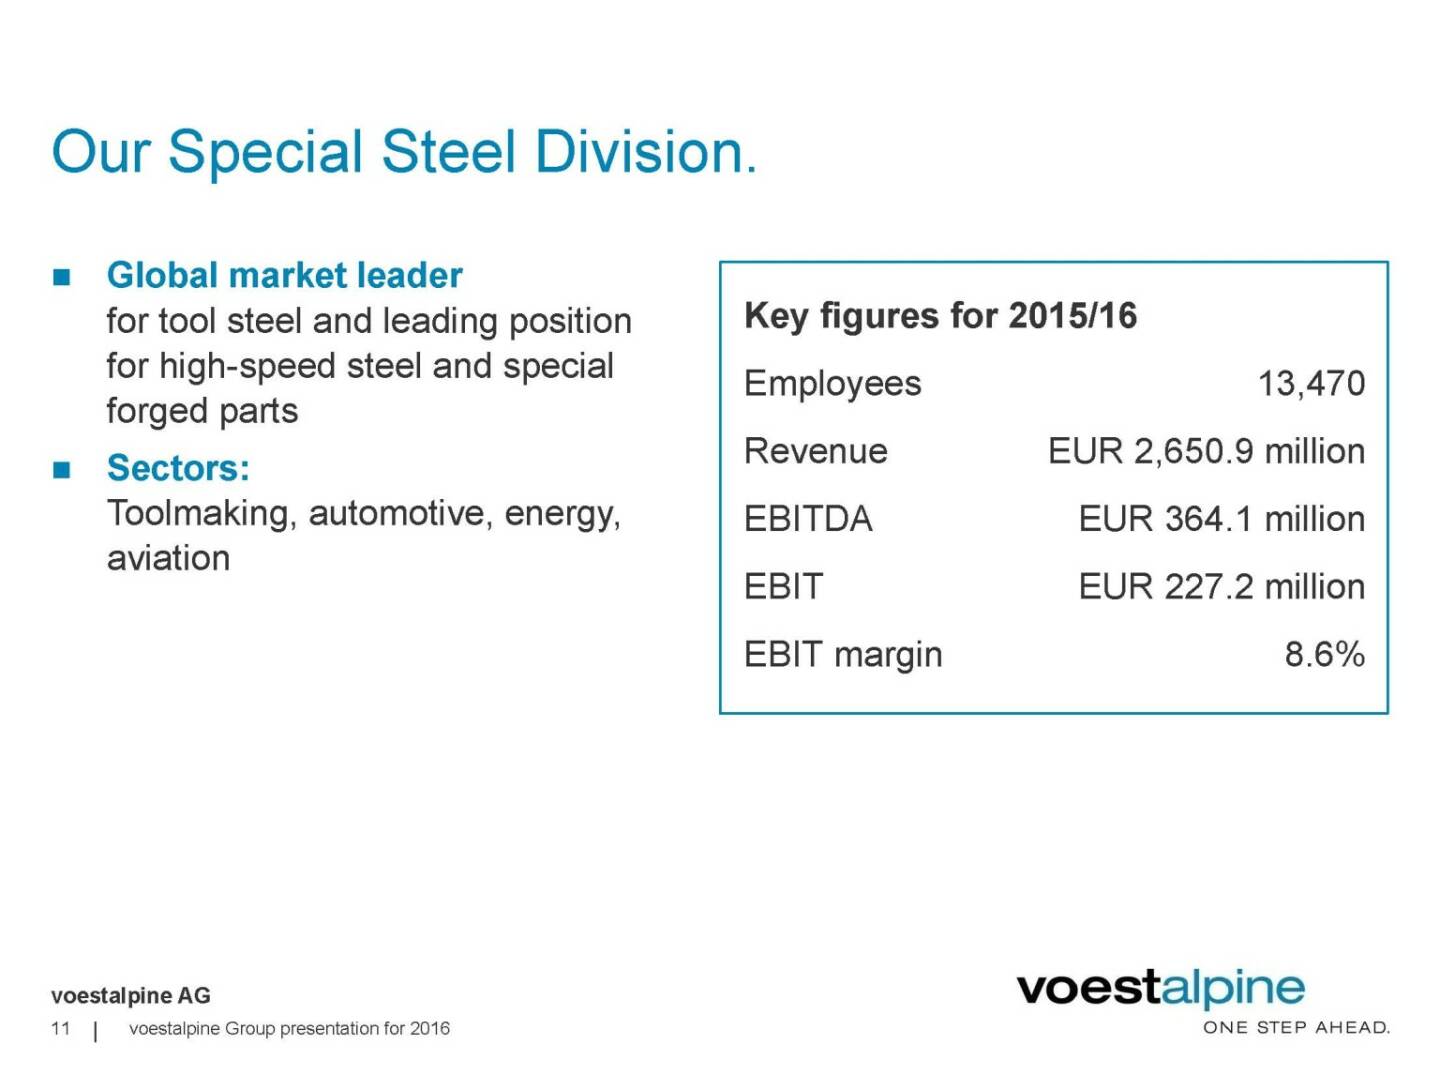 voestalpine - Our Special Steel Division